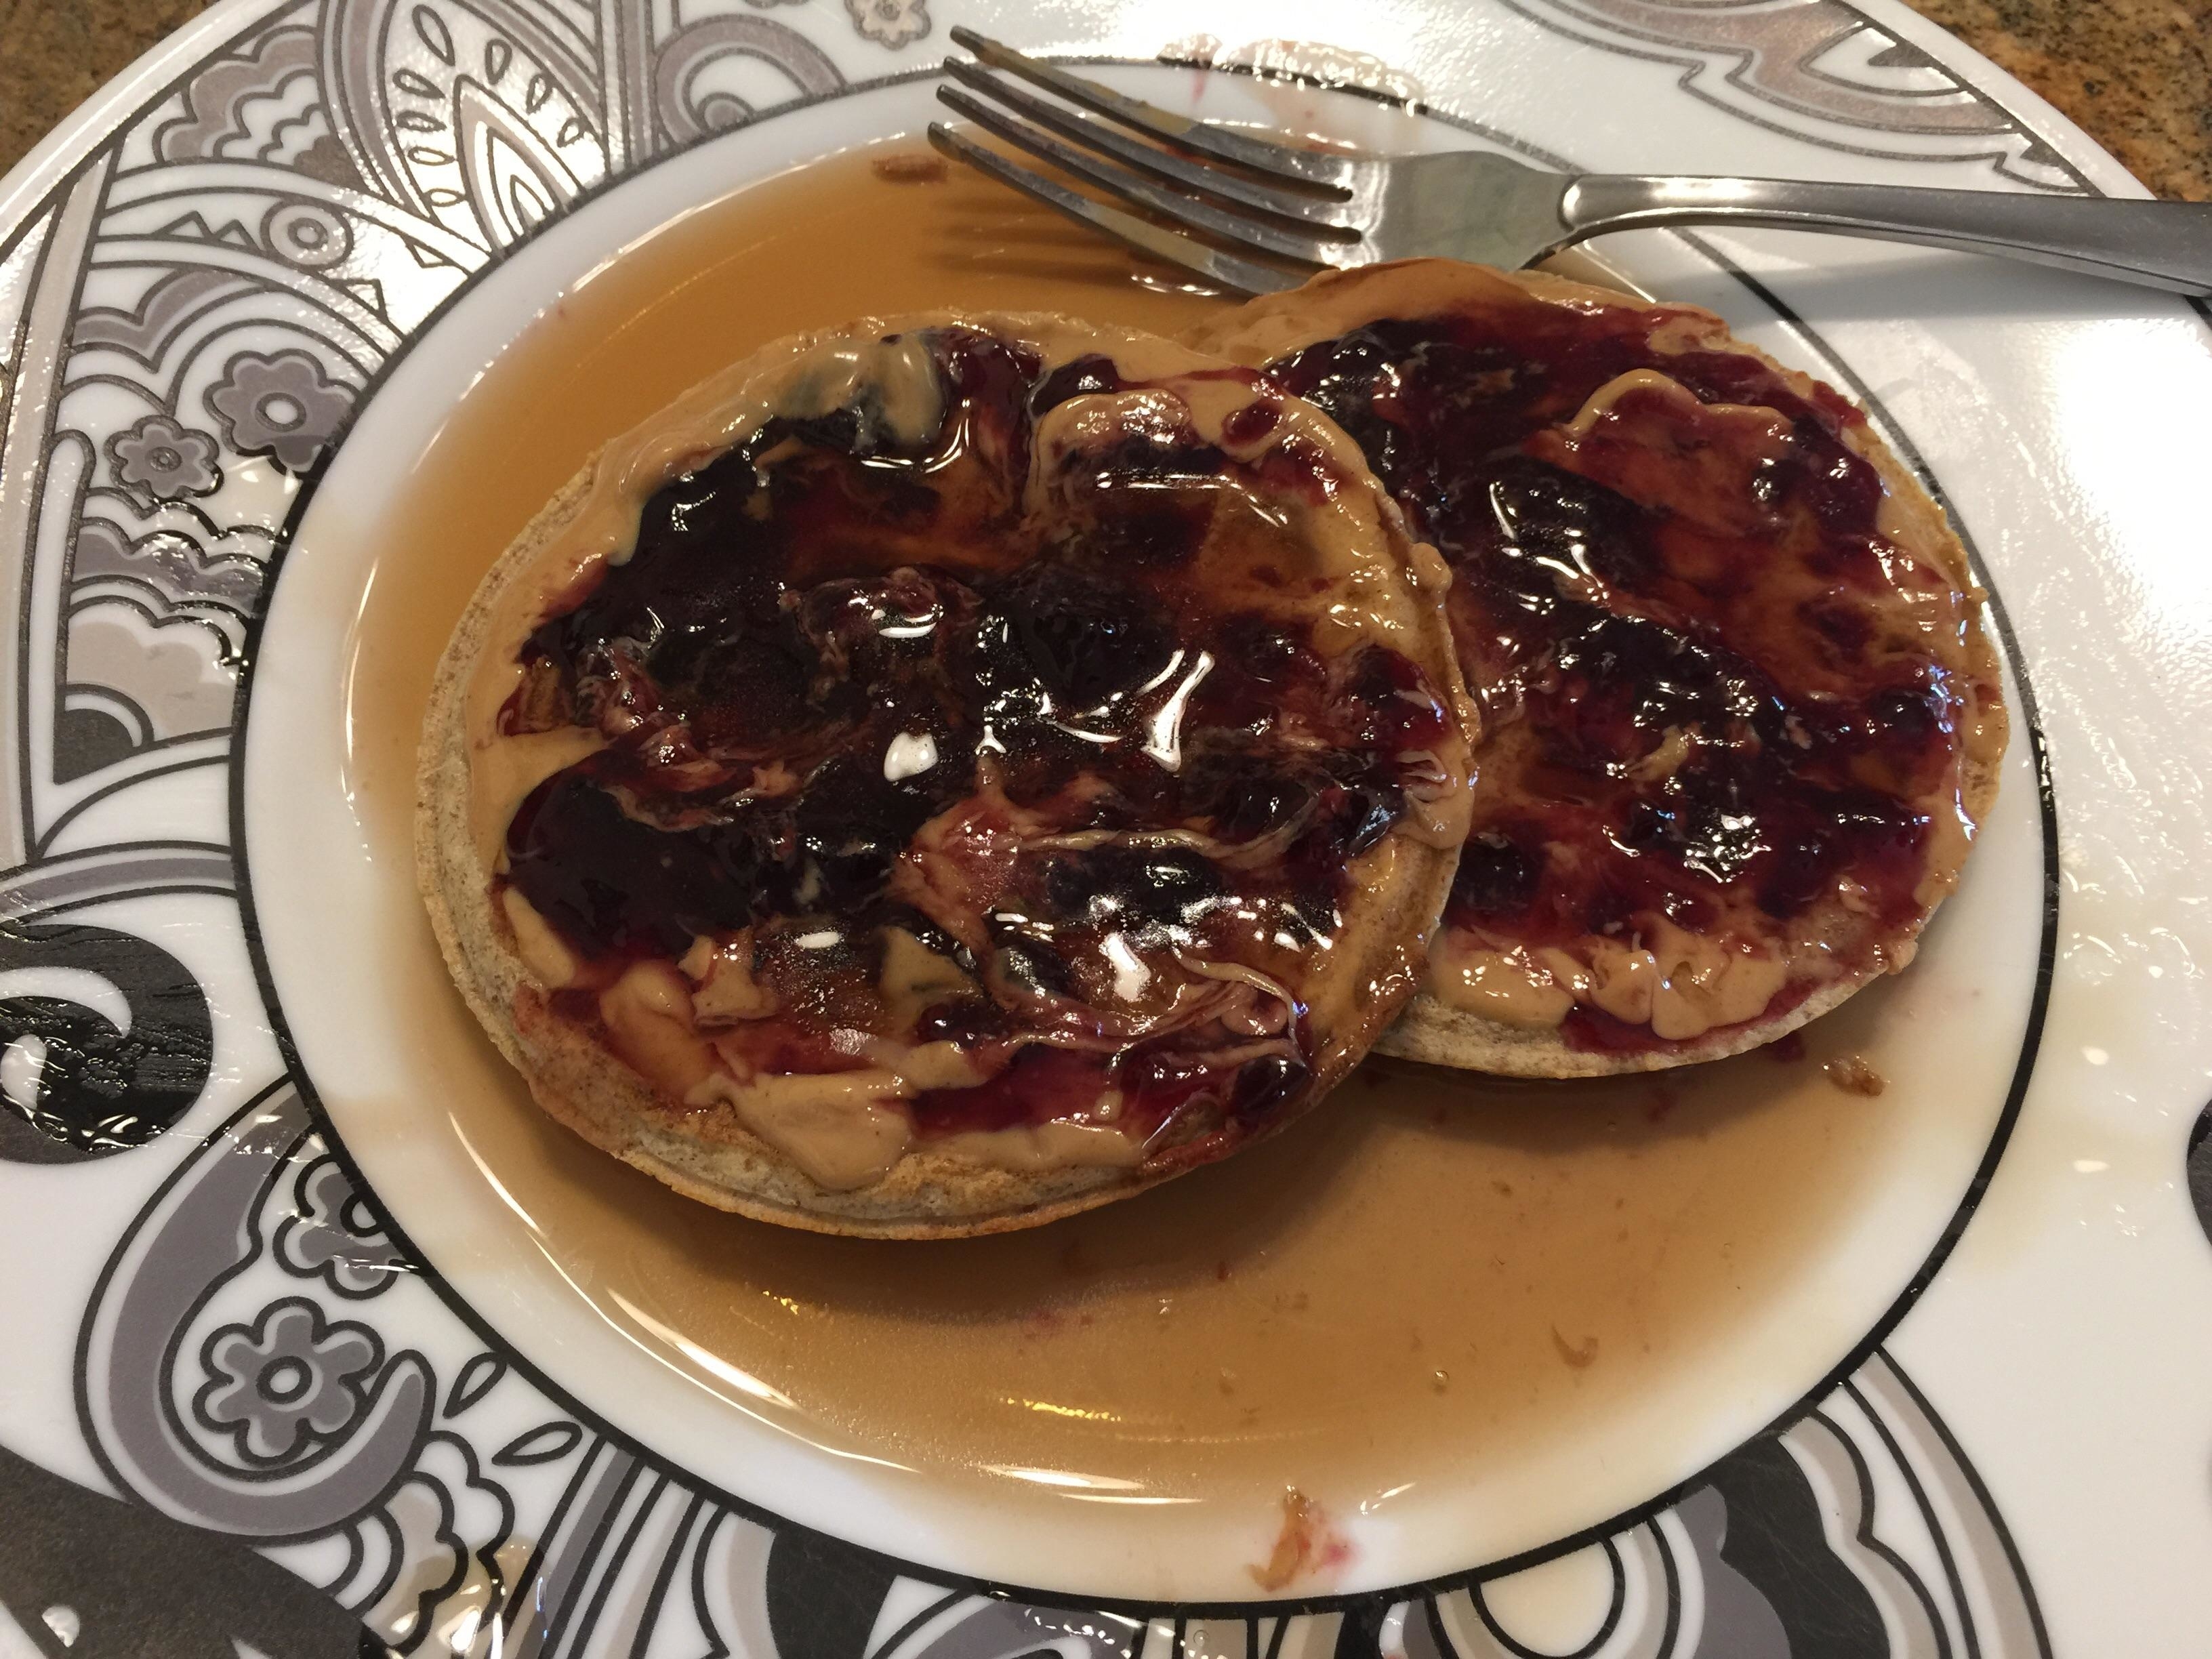 Two pancakes on a plate with syrup and jelly, alongside a fork